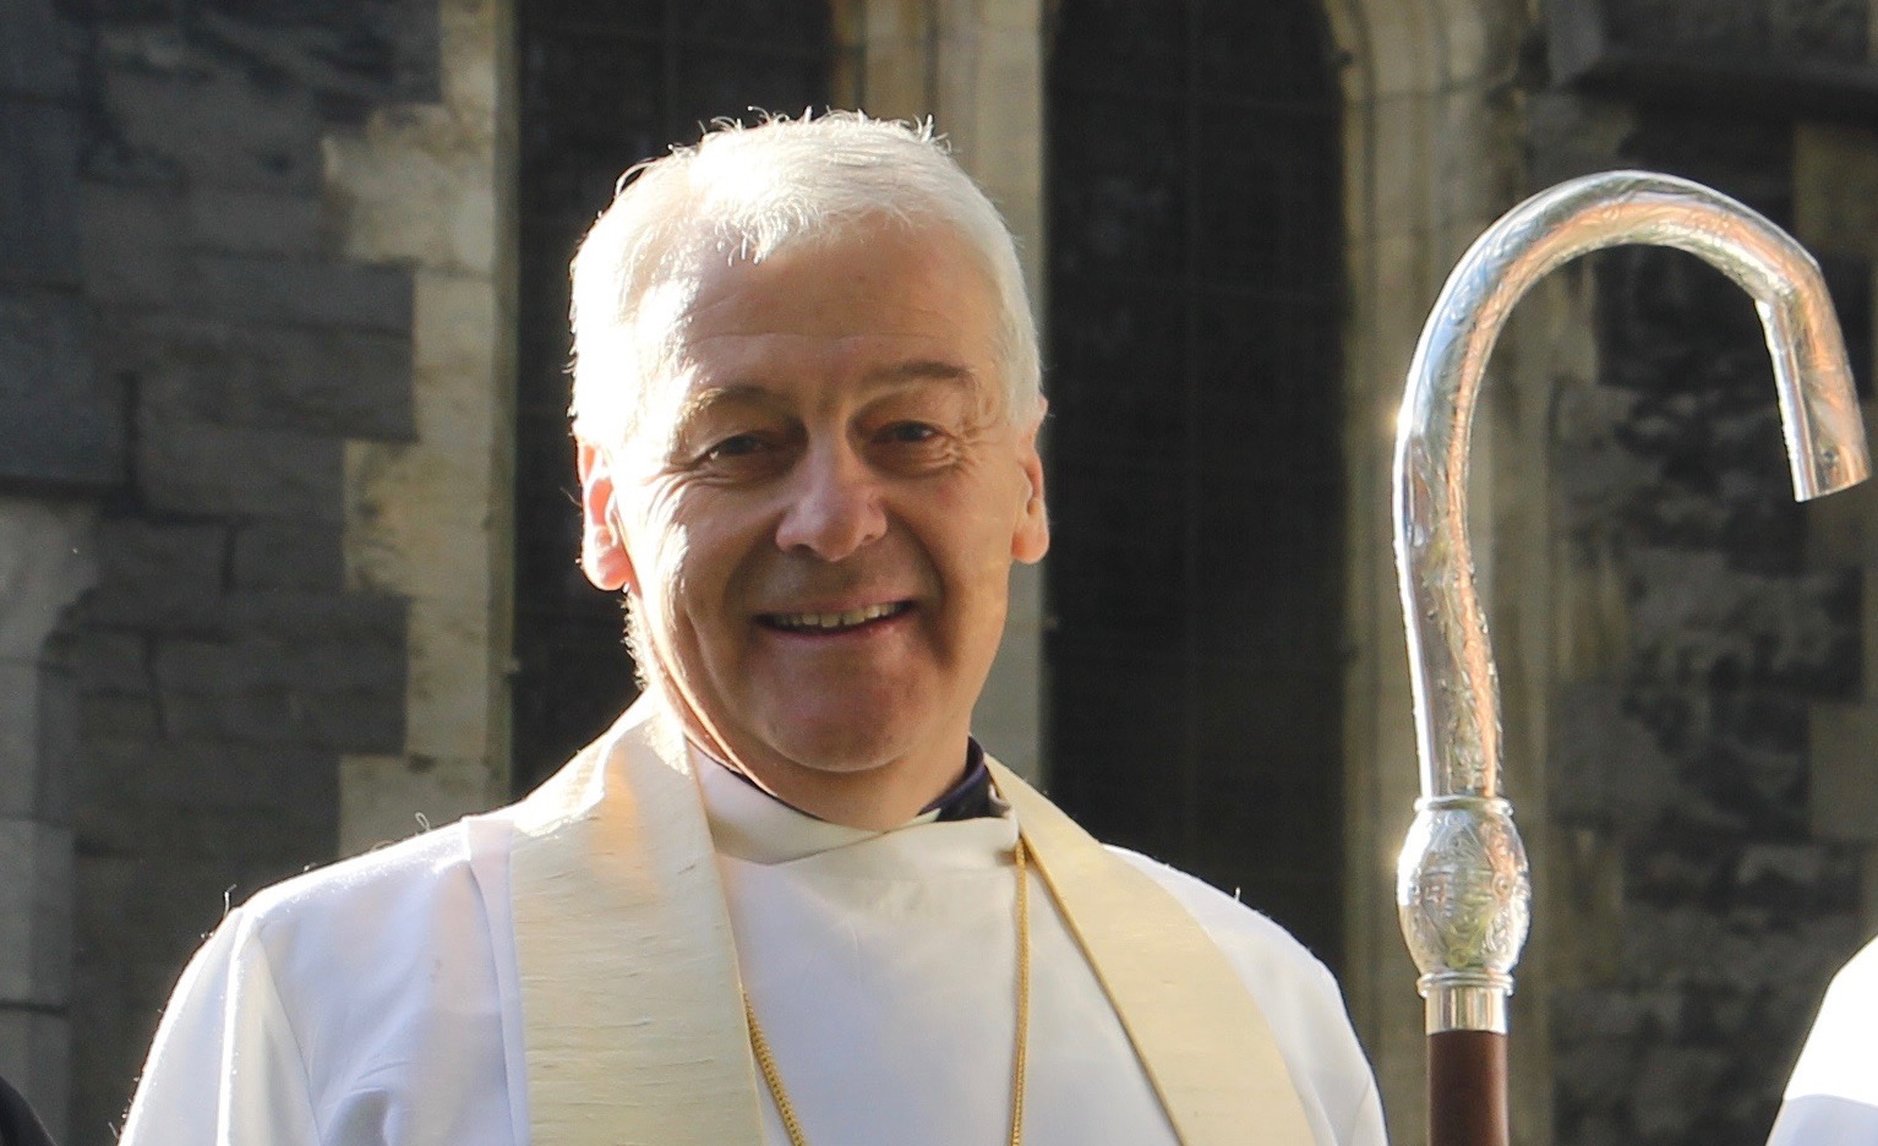 Easter Message from the Archbishop of Dublin - “What does it mean for us to say: I have seen the Lord?” – Archbishop Michael Jackson.